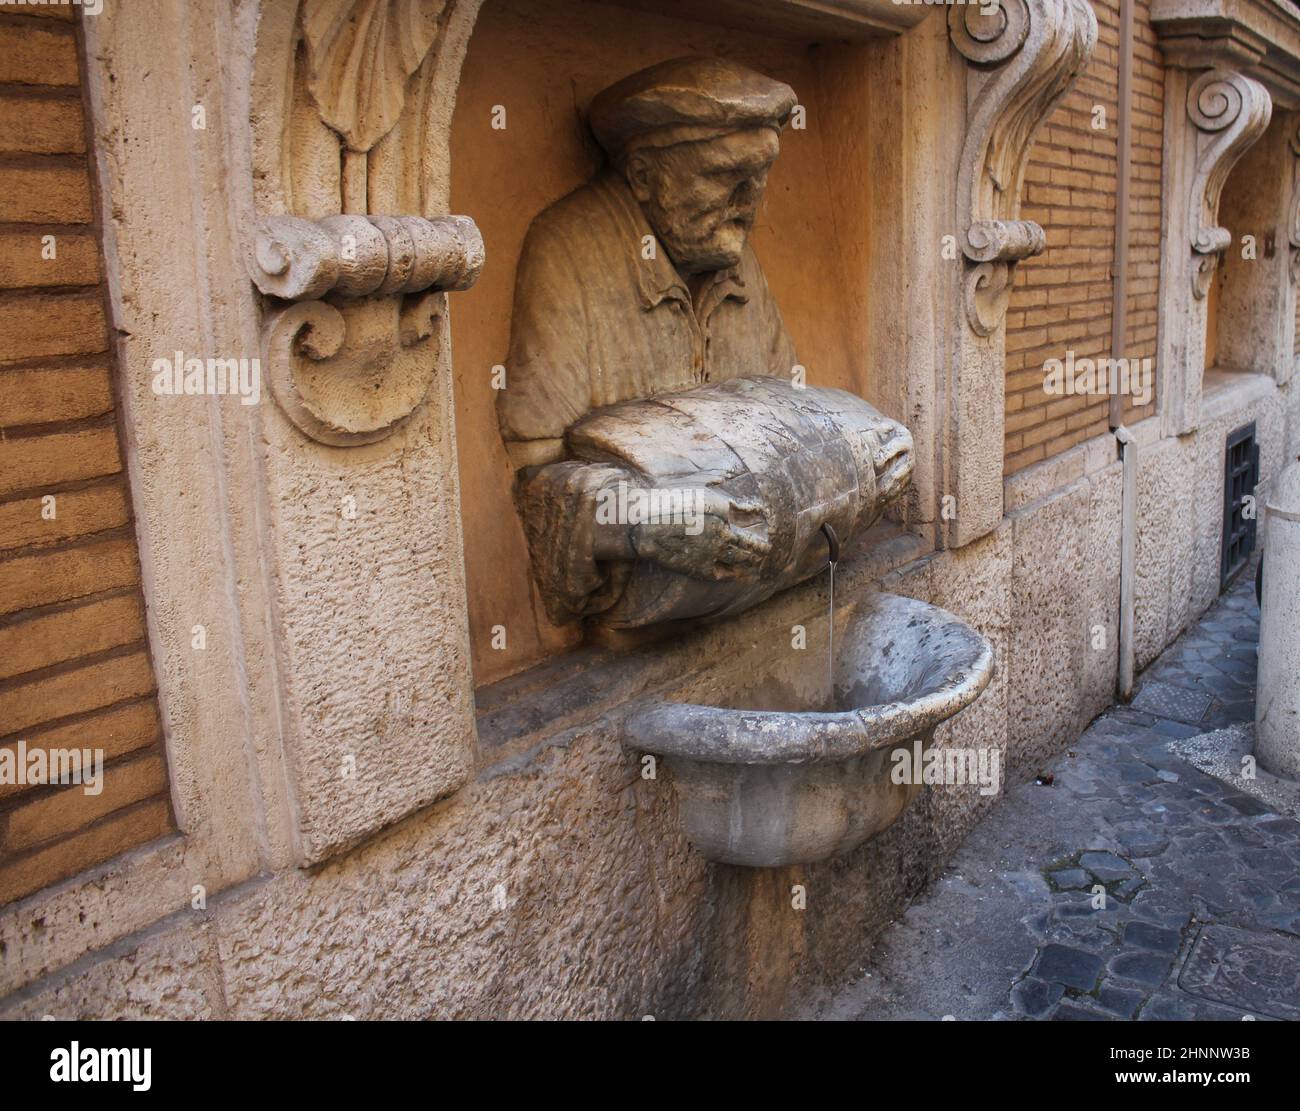 ROME, ITALY - December 28, 2018: Statue of an old man pouring water from a barrel used as a fountain nicknamed 'The Porter'. It was made in 1580 and used as a site to post satirical writings. Stock Photo